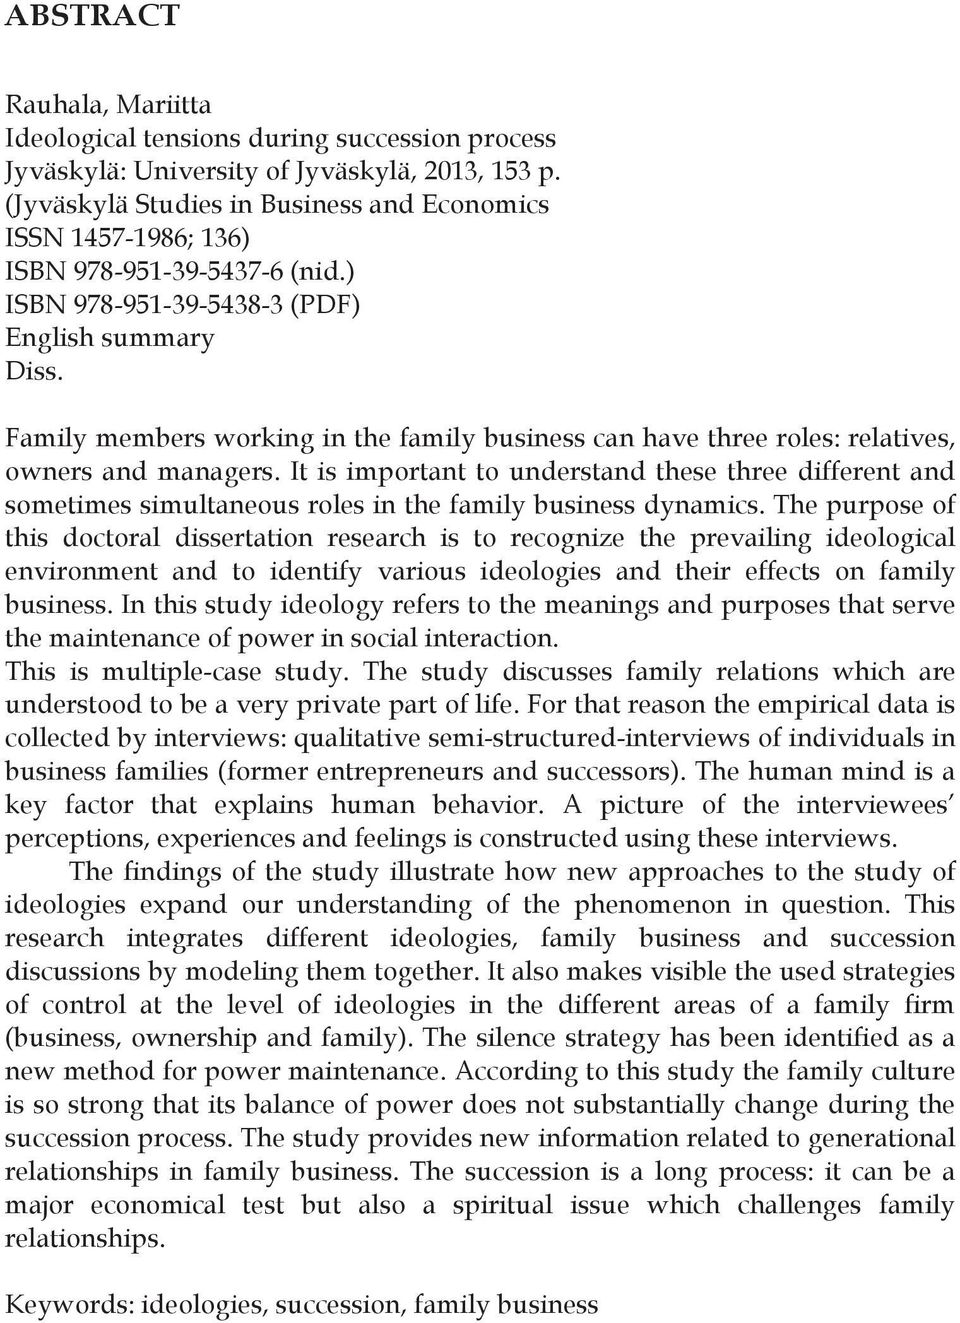 Family members working in the family business can have three roles: relatives, owners and managers.